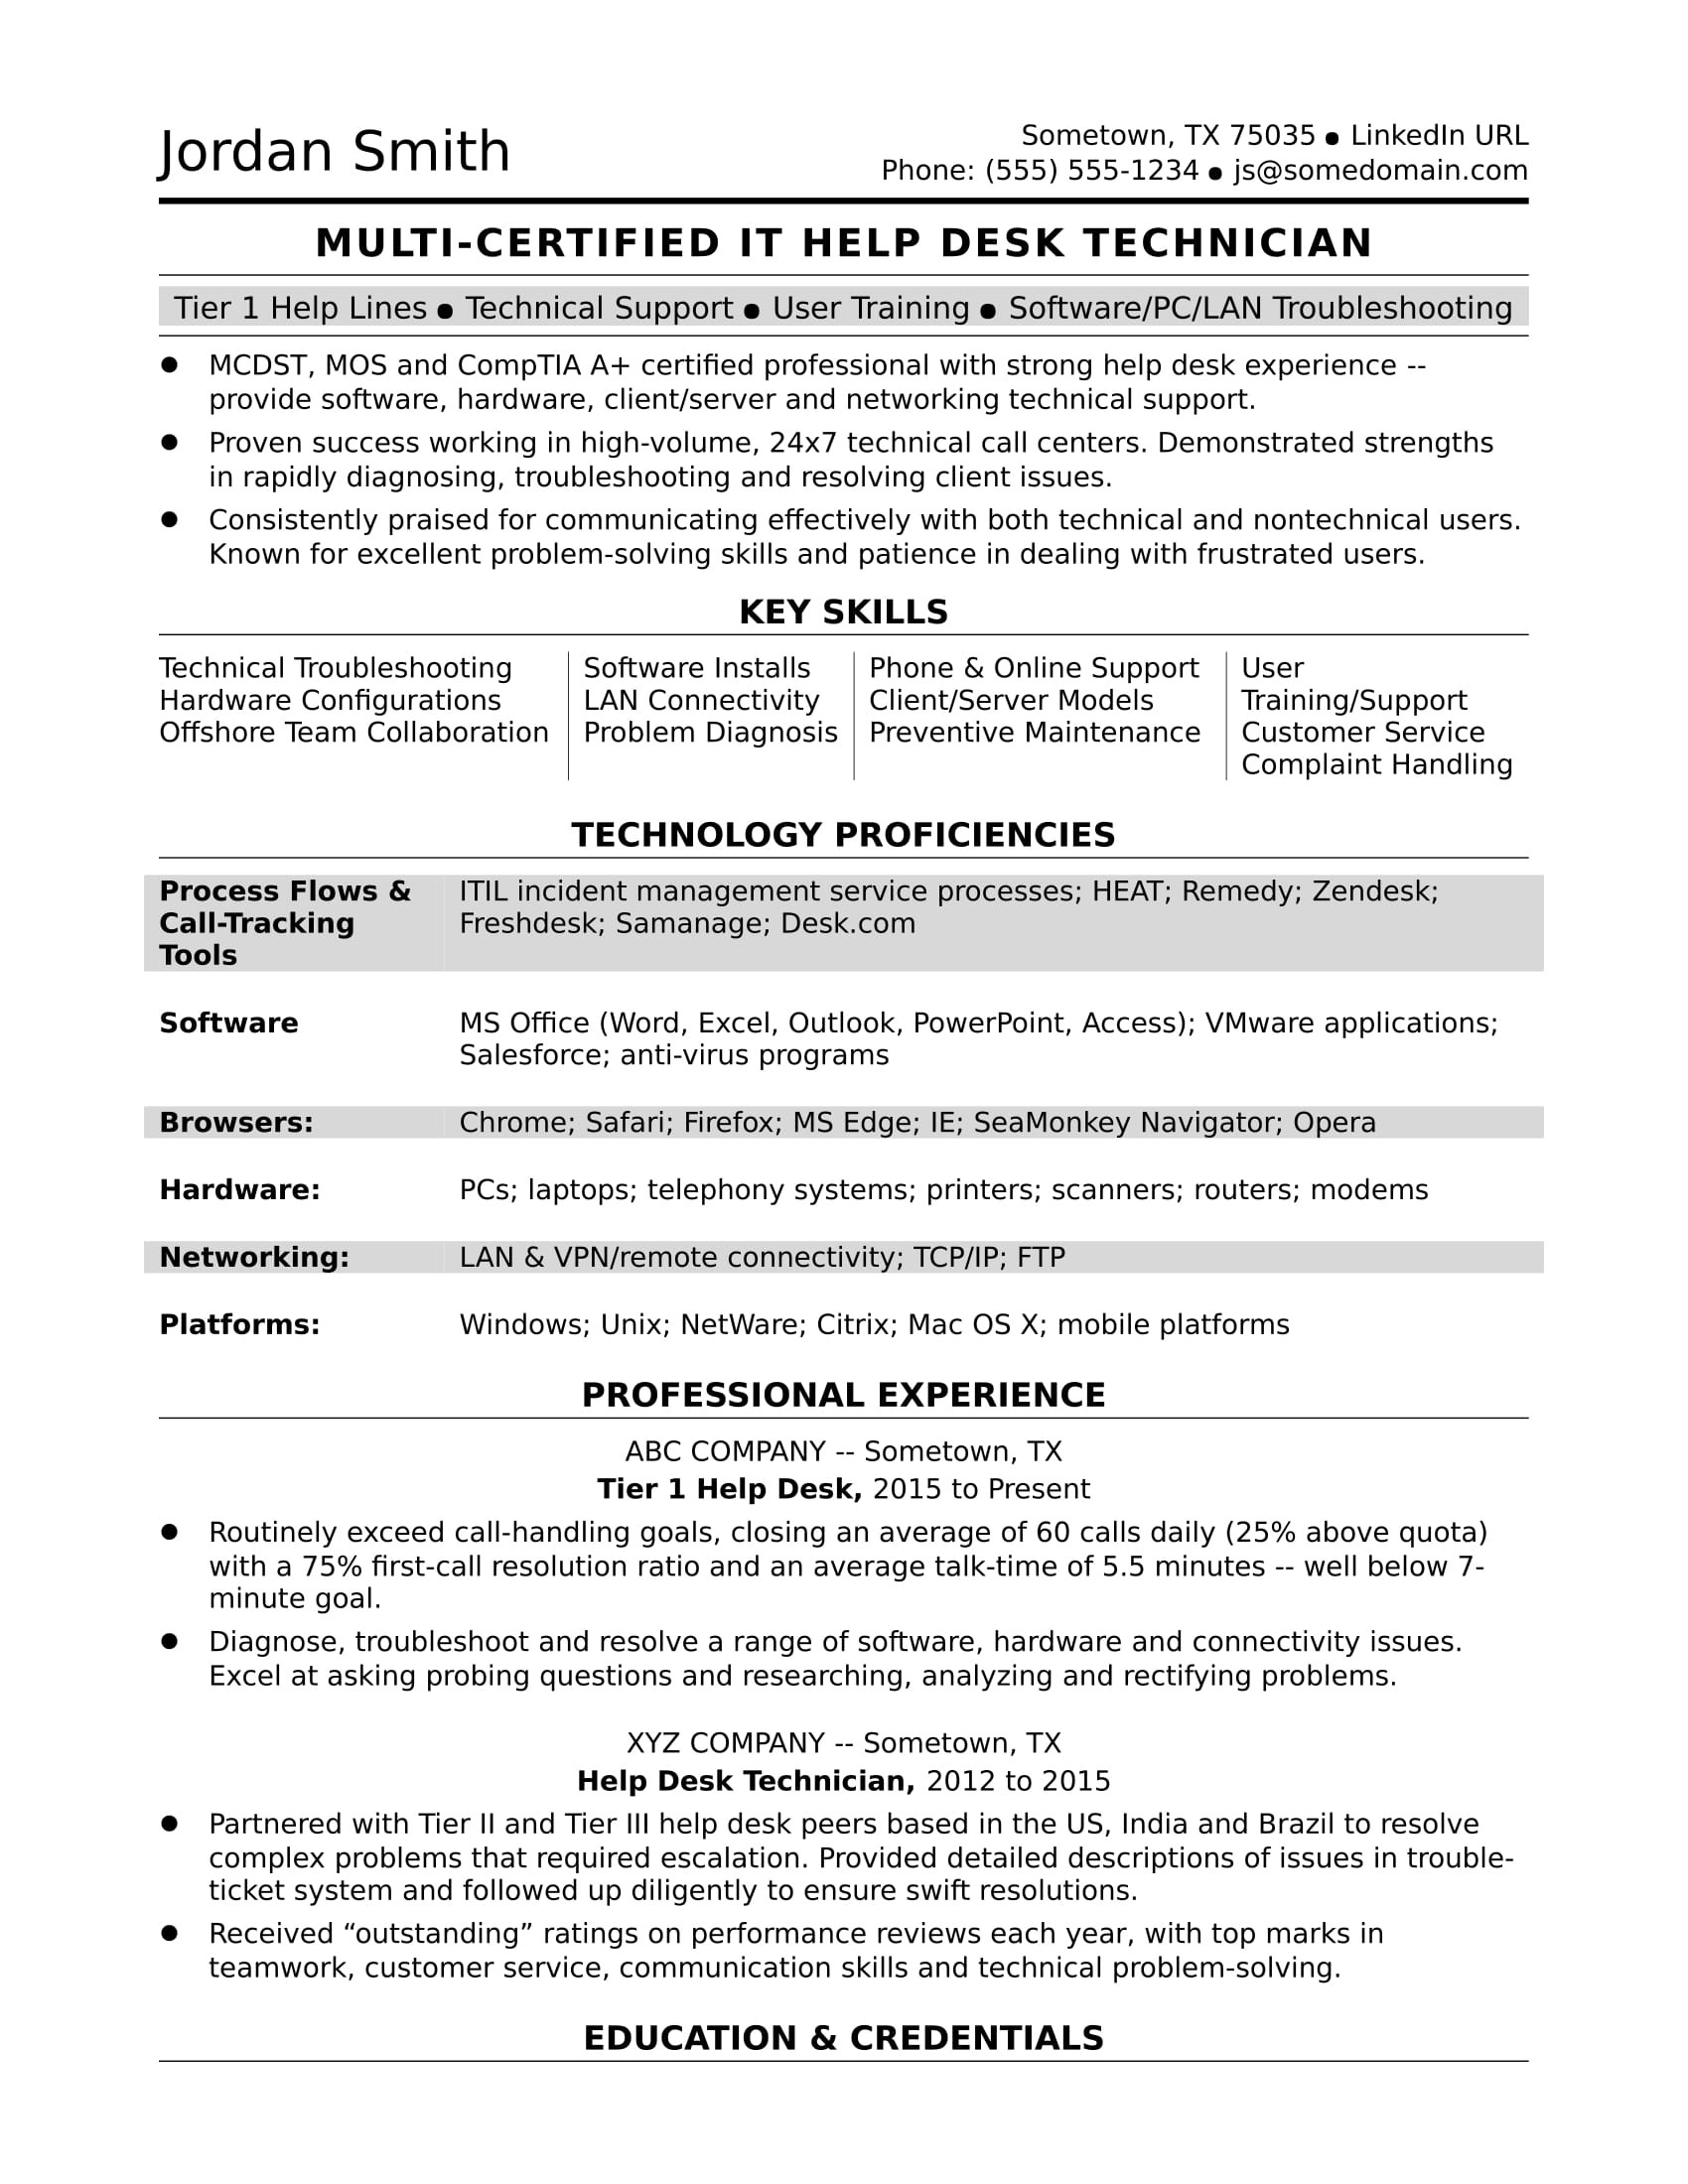 Technical Support Resume Template and Sample Sample Resume for A Midlevel It Help Desk Professional Monster.com